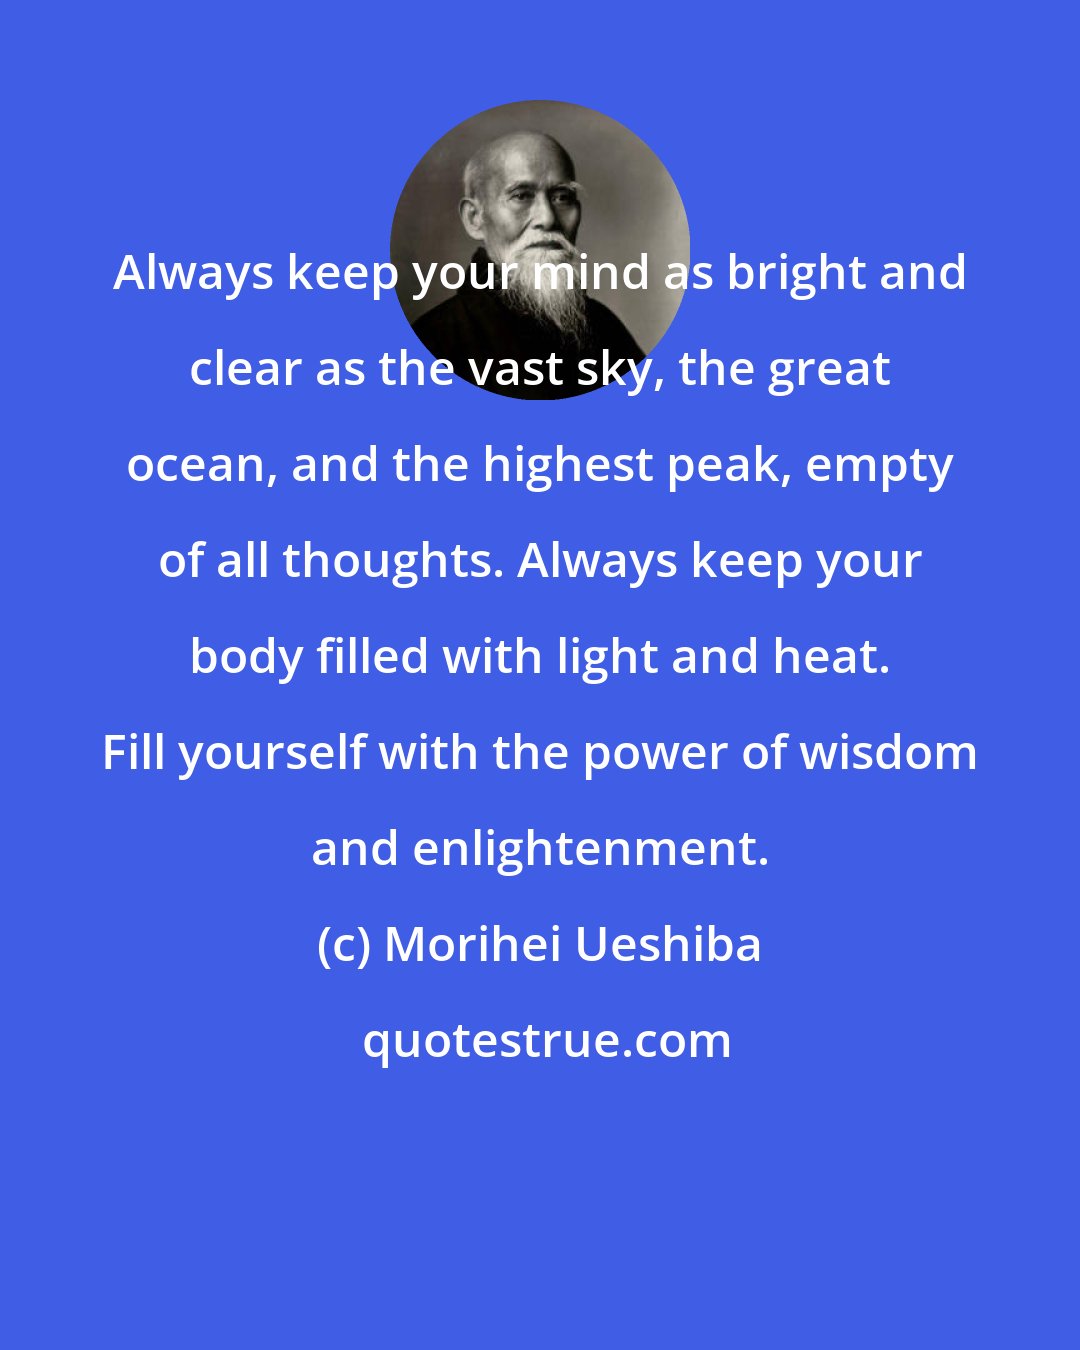 Morihei Ueshiba: Always keep your mind as bright and clear as the vast sky, the great ocean, and the highest peak, empty of all thoughts. Always keep your body filled with light and heat. Fill yourself with the power of wisdom and enlightenment.